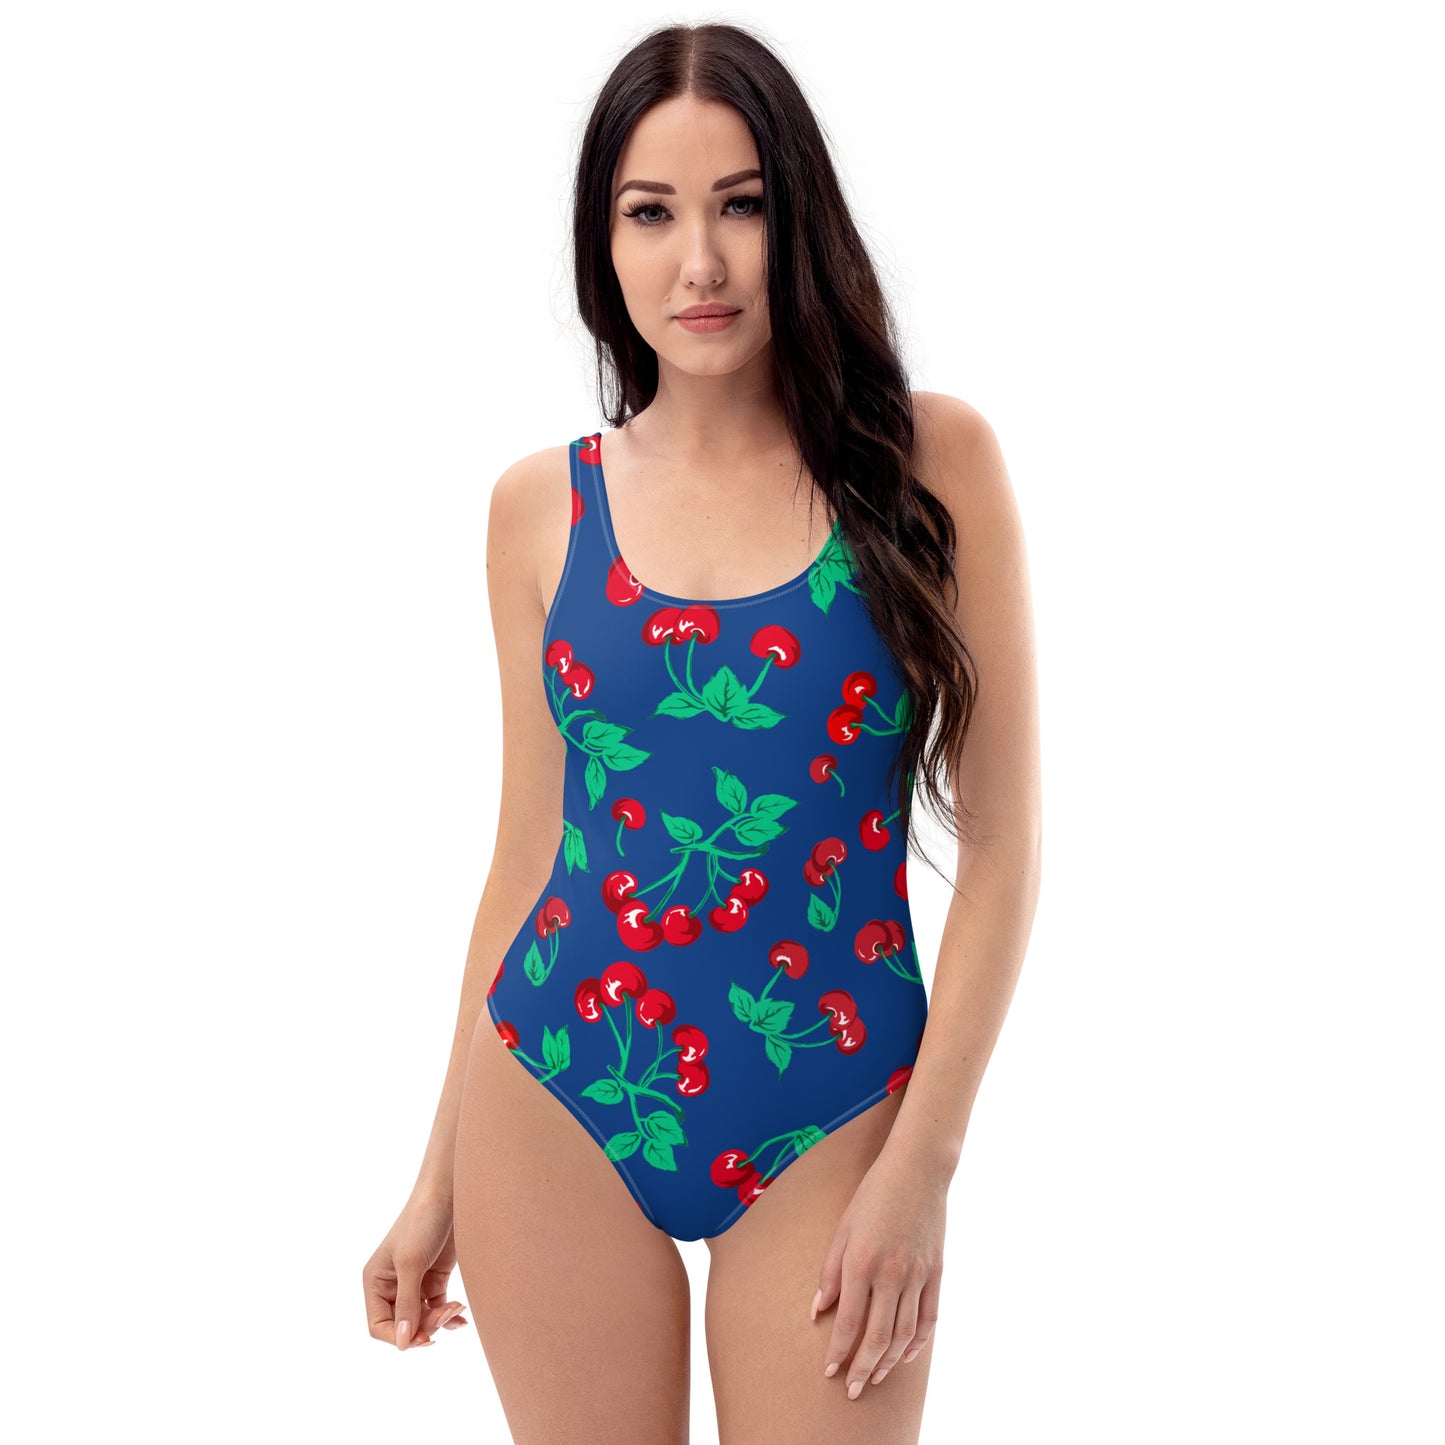 Cherry Print Swimsuit With Pleats Blue/Multi - Country Classics